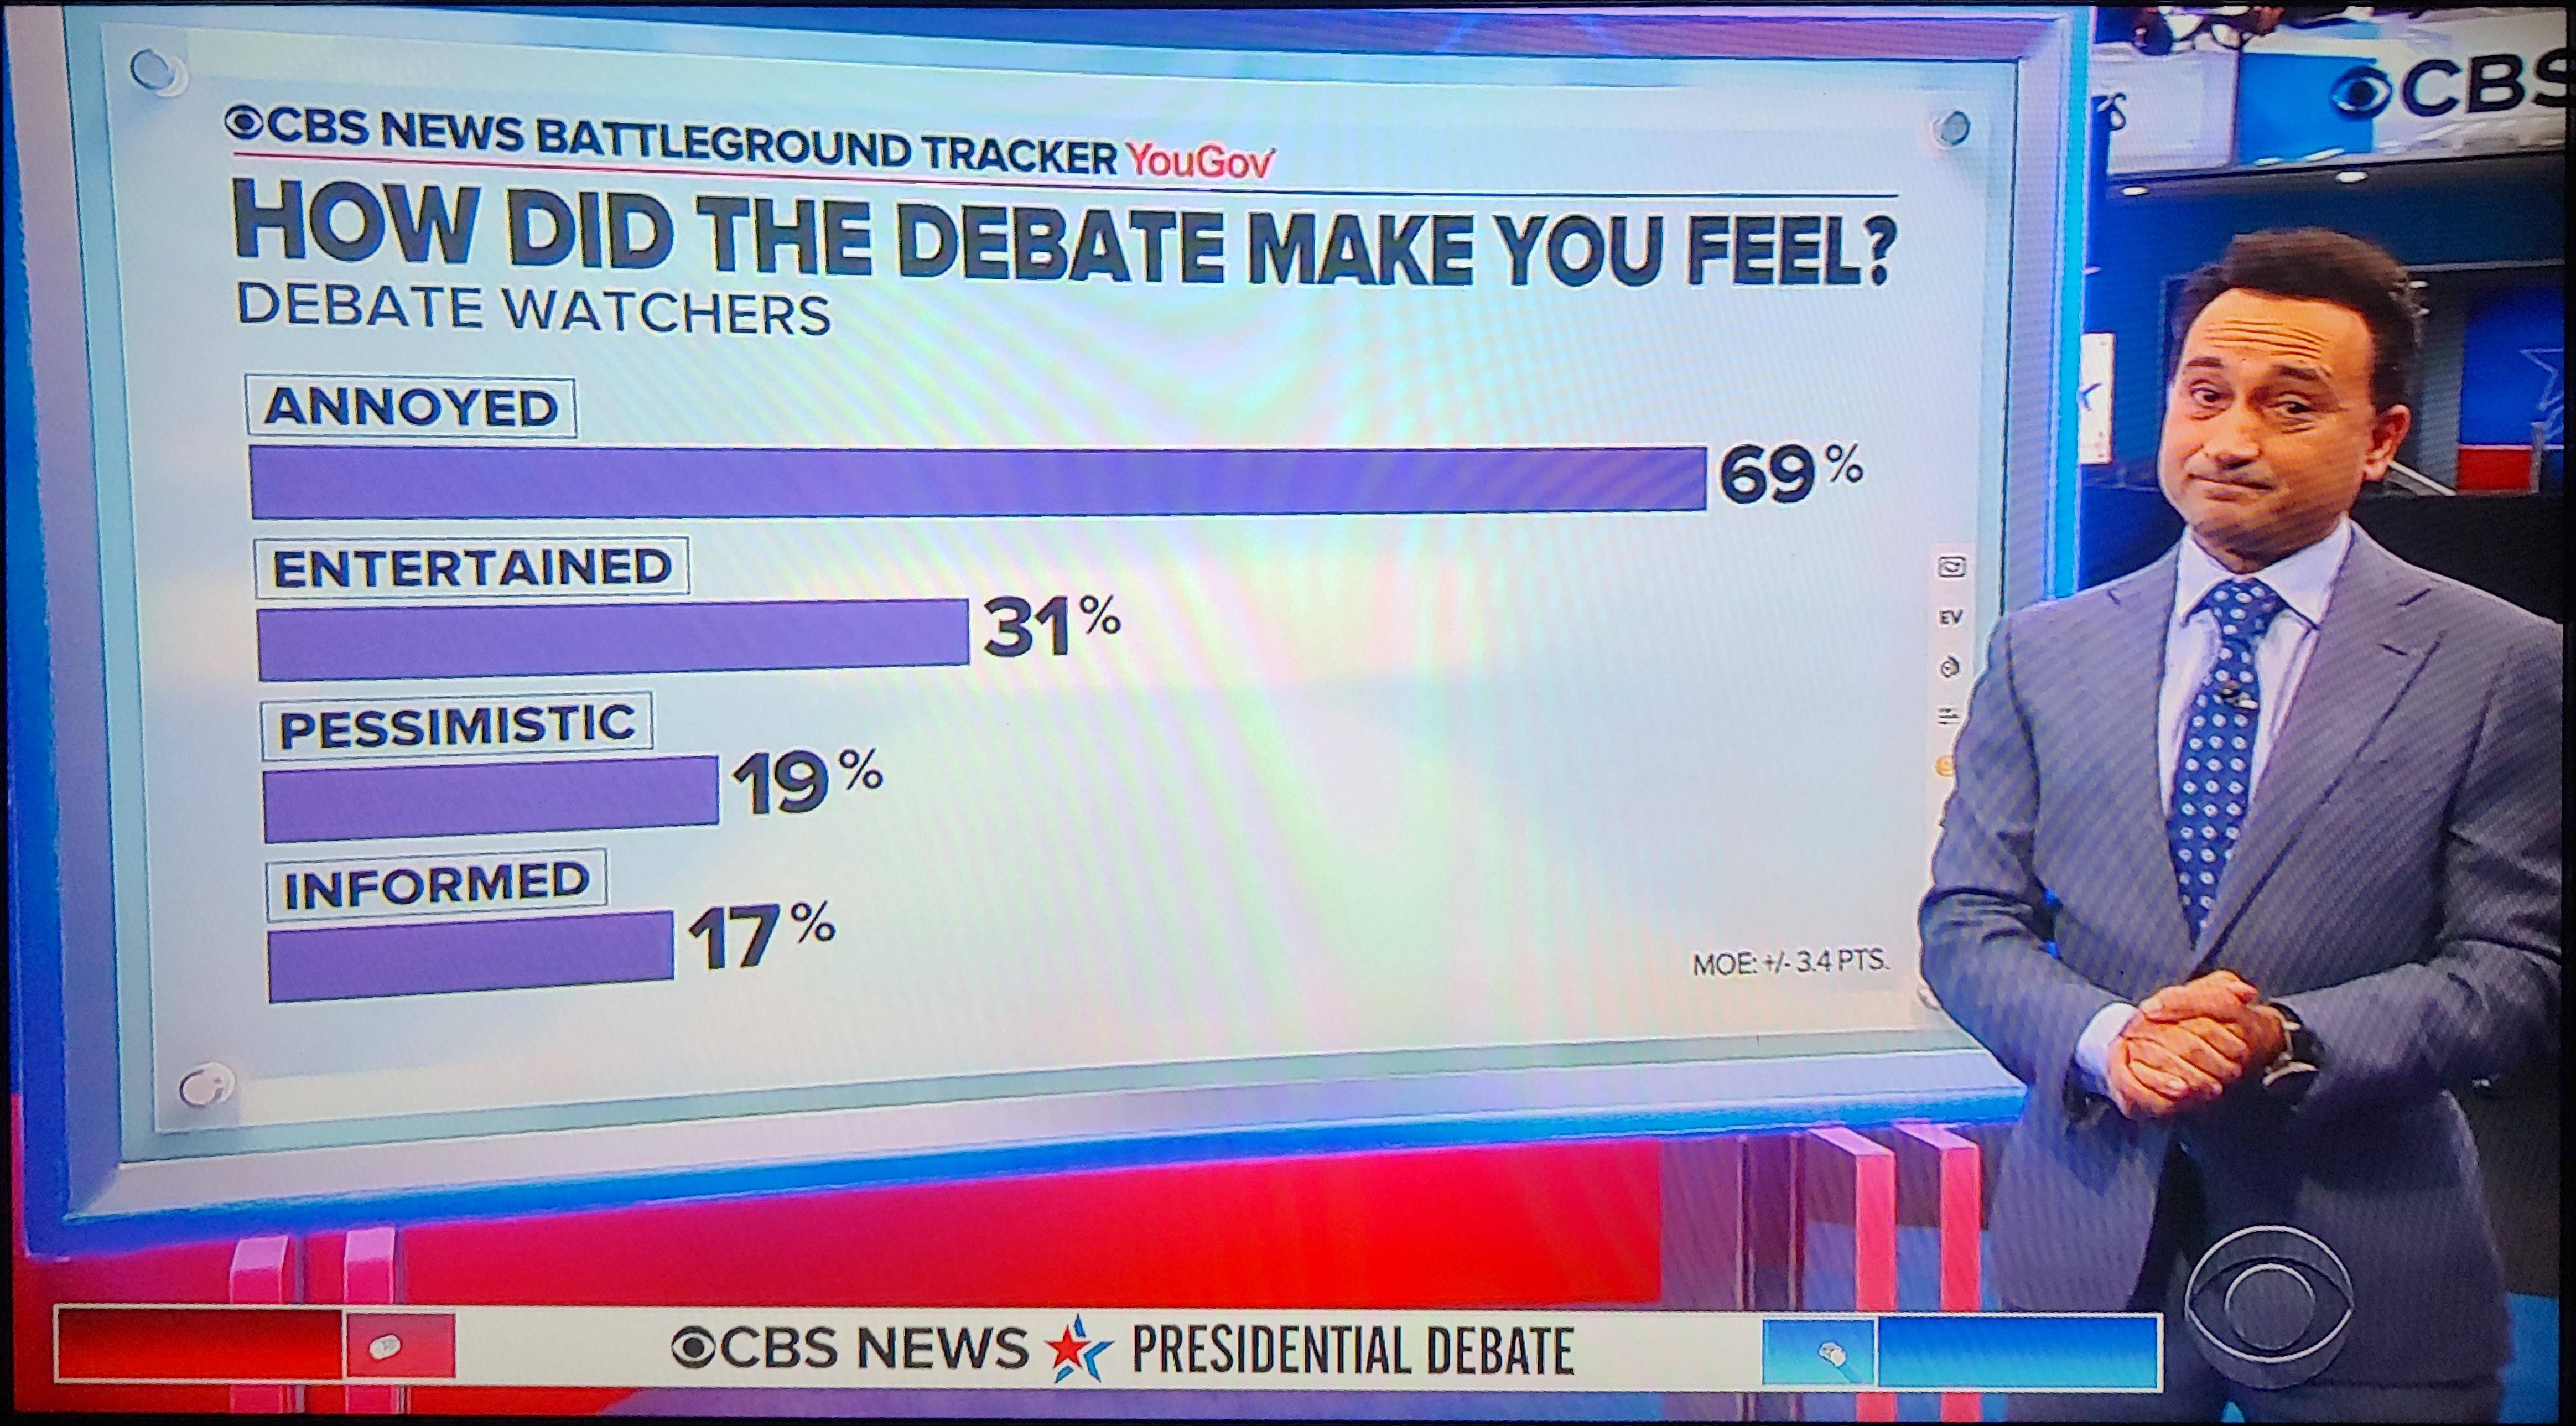 funny memes - How Did The Debate Make You Feel? Debate Watchers Annoyed 69% Entertained 31% Pessimistic 19% Informed 17%